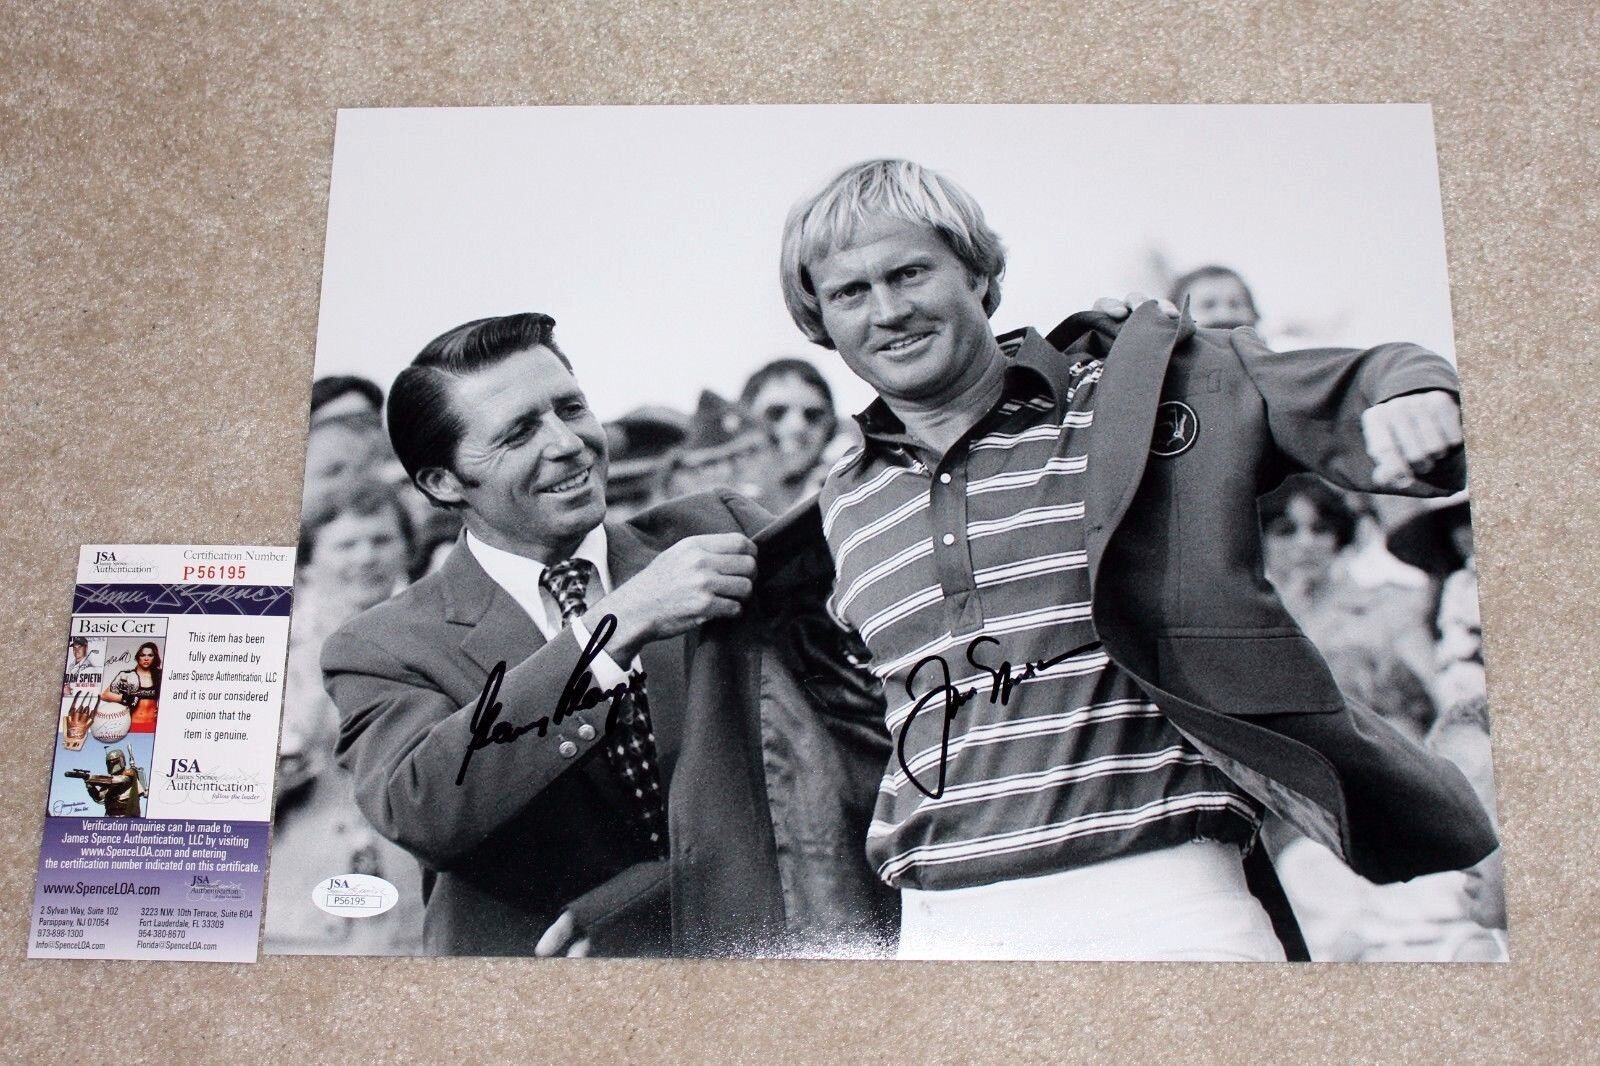 JACK NICKLAUS GARY PLAYER SIGNED AUTHENTIC MASTERS 11X14 Photo Poster painting w/ JSA COA PROOF